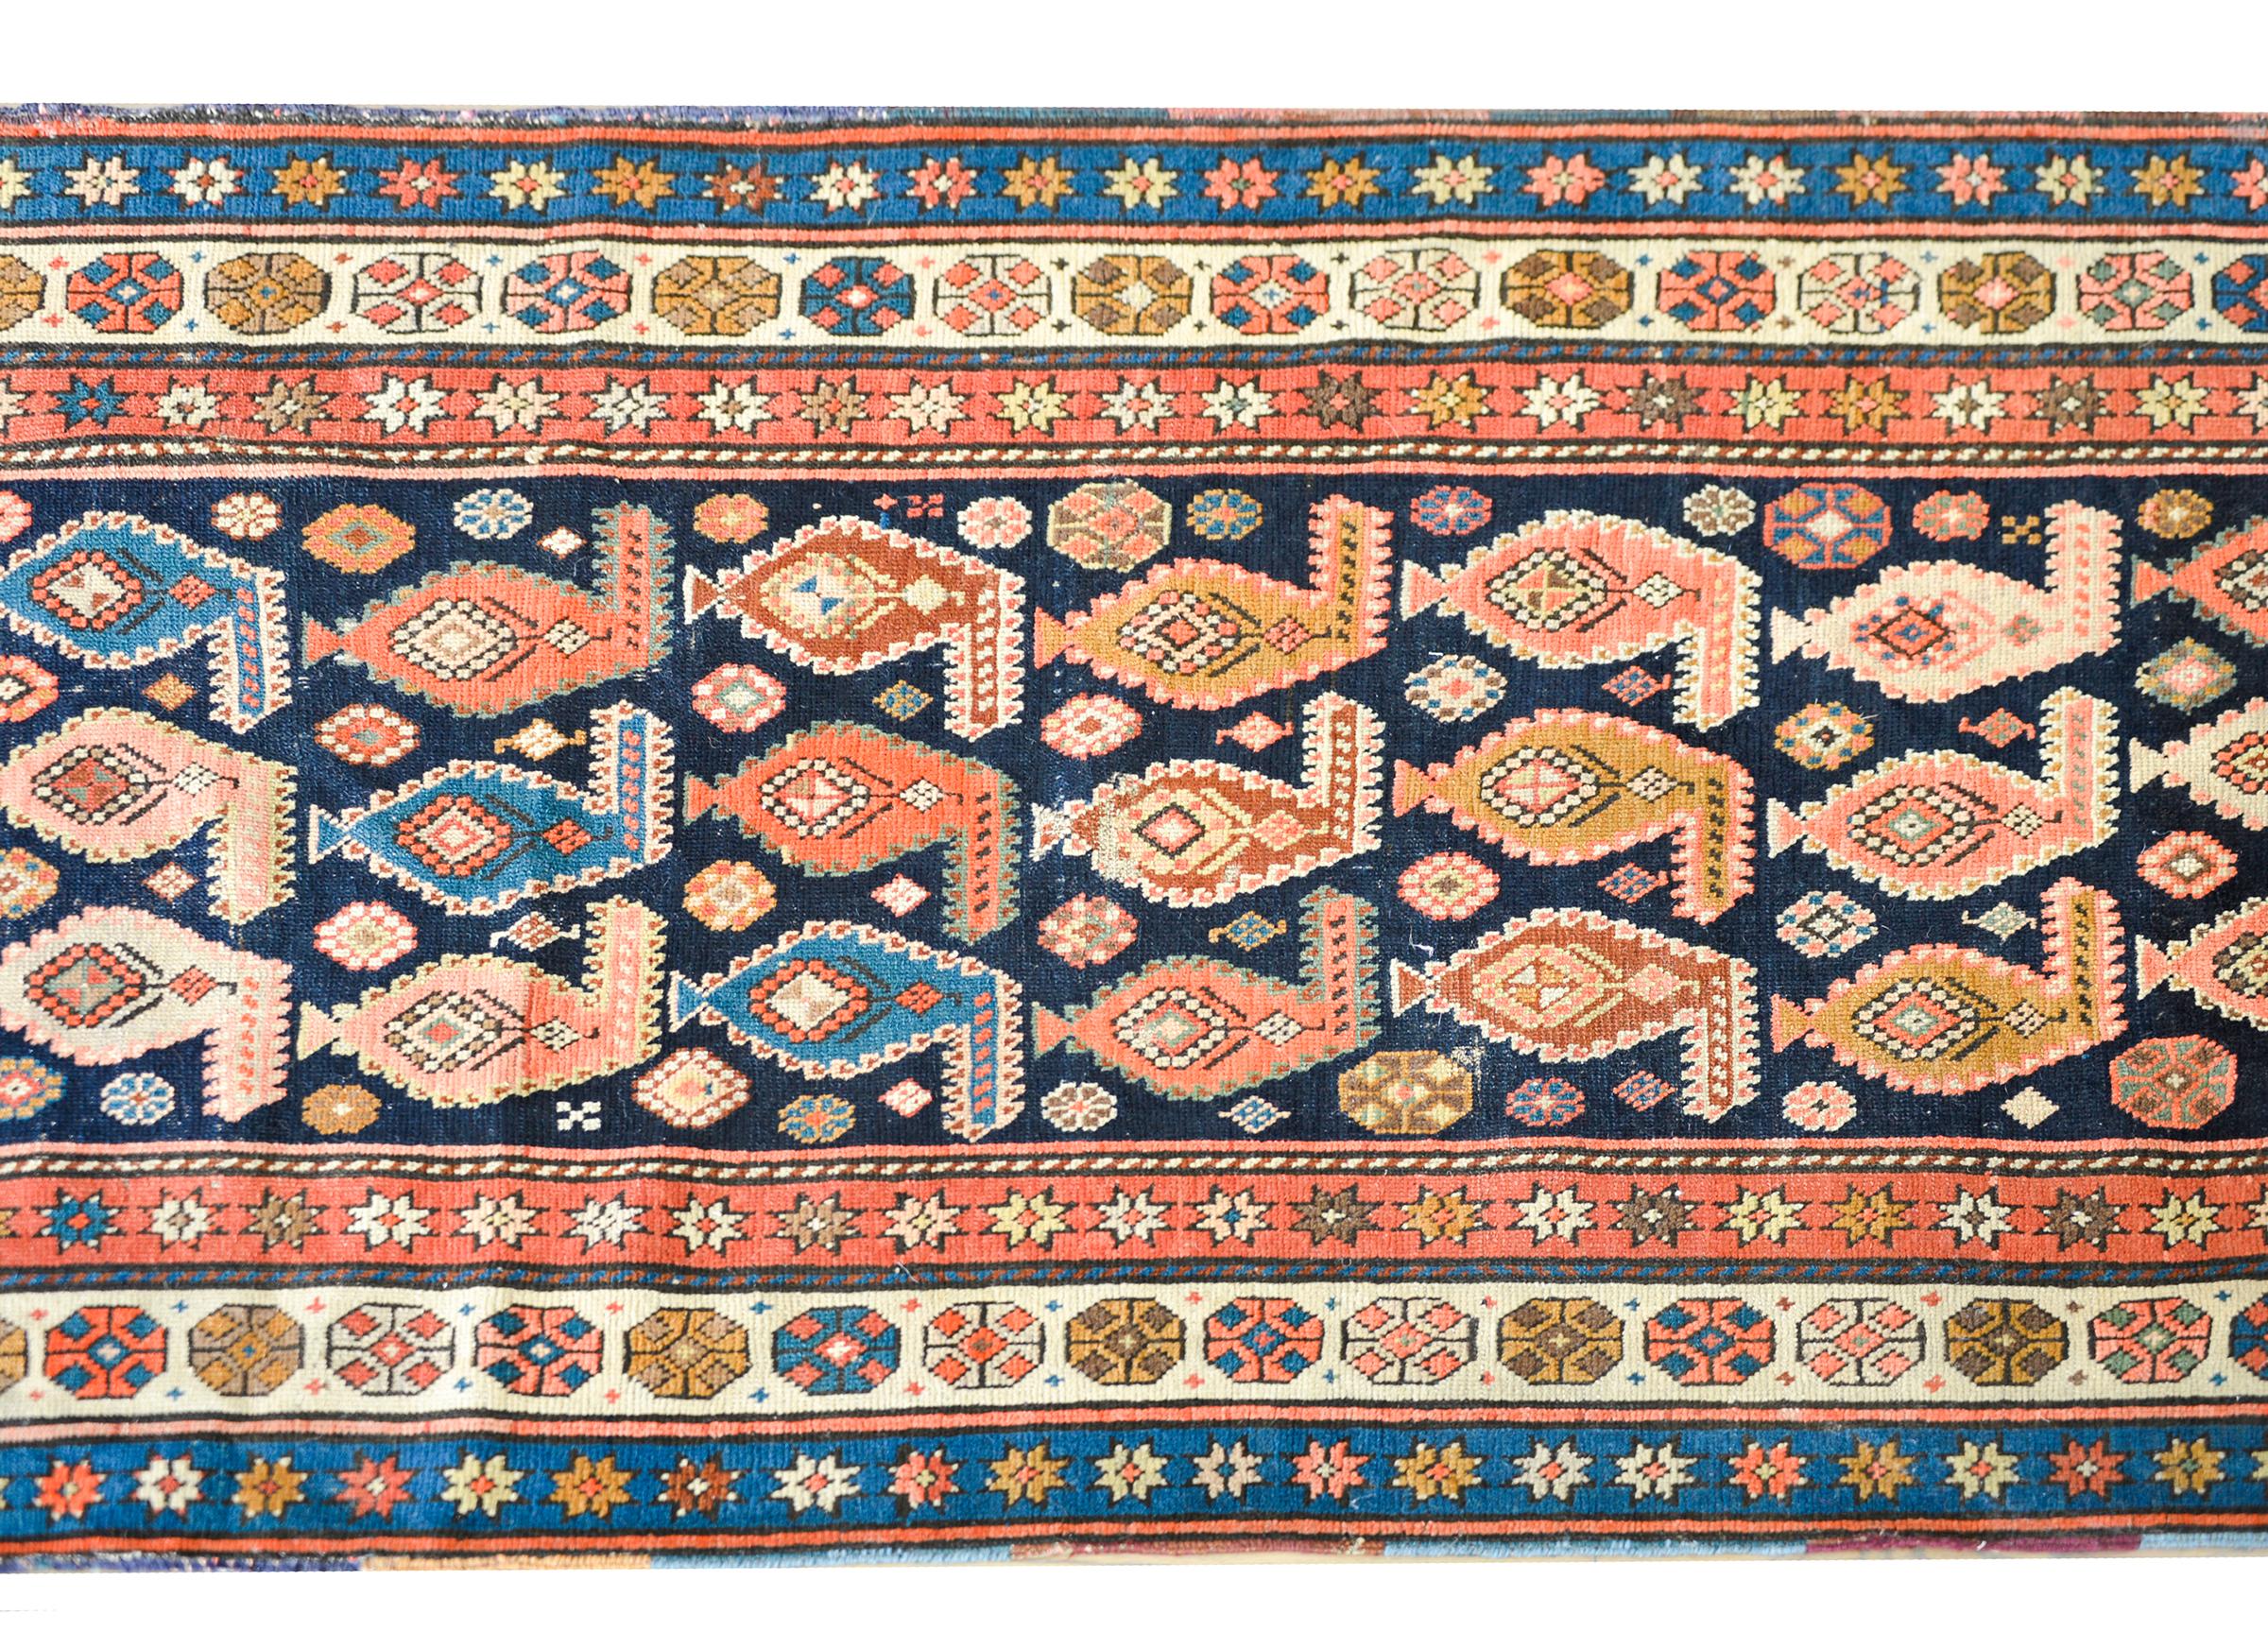 A stunning early 20th century hand-knotted Persian Karabagh rug with an all-over pattern of multi-colored paisleys amidst a field of petite stylized flowers set against a dark indigo background. The border is wonderful with a central stylized floral